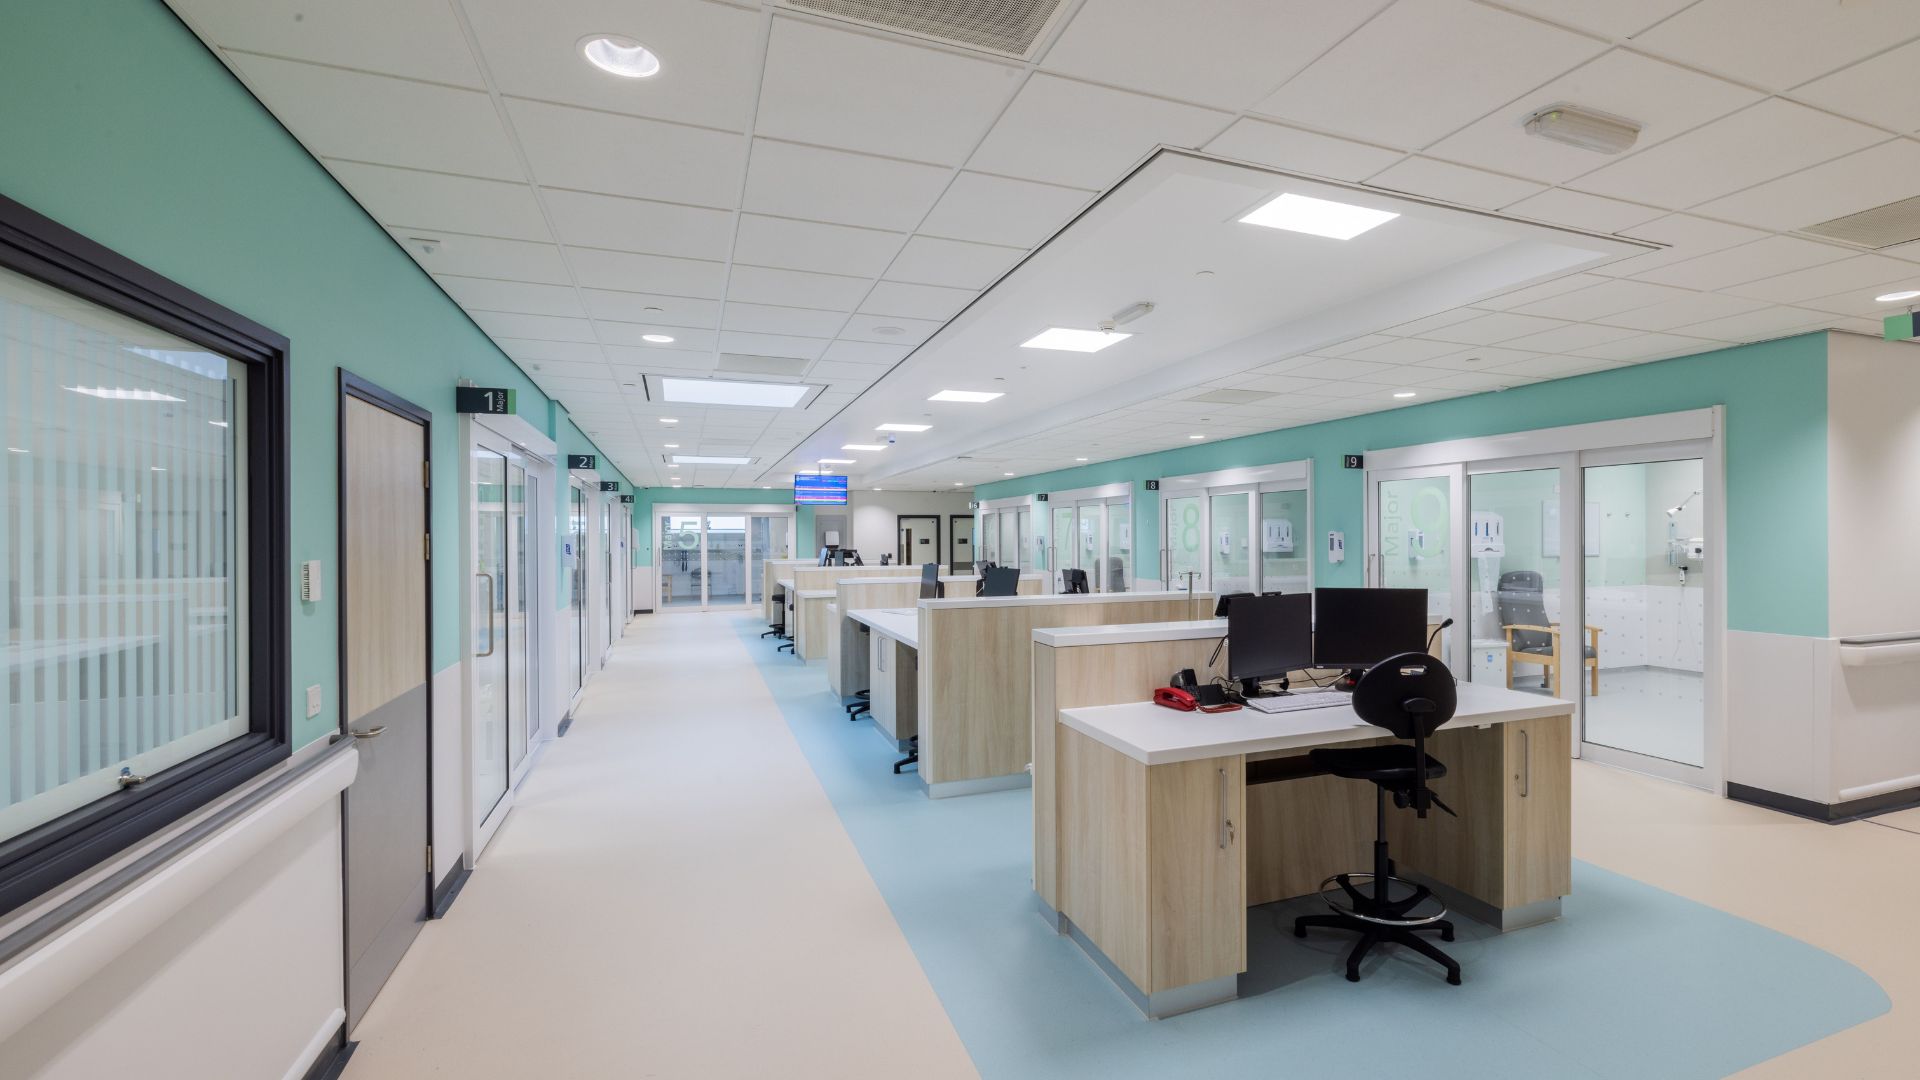 An image of the central area where staff will work in the new HRI A&E Department